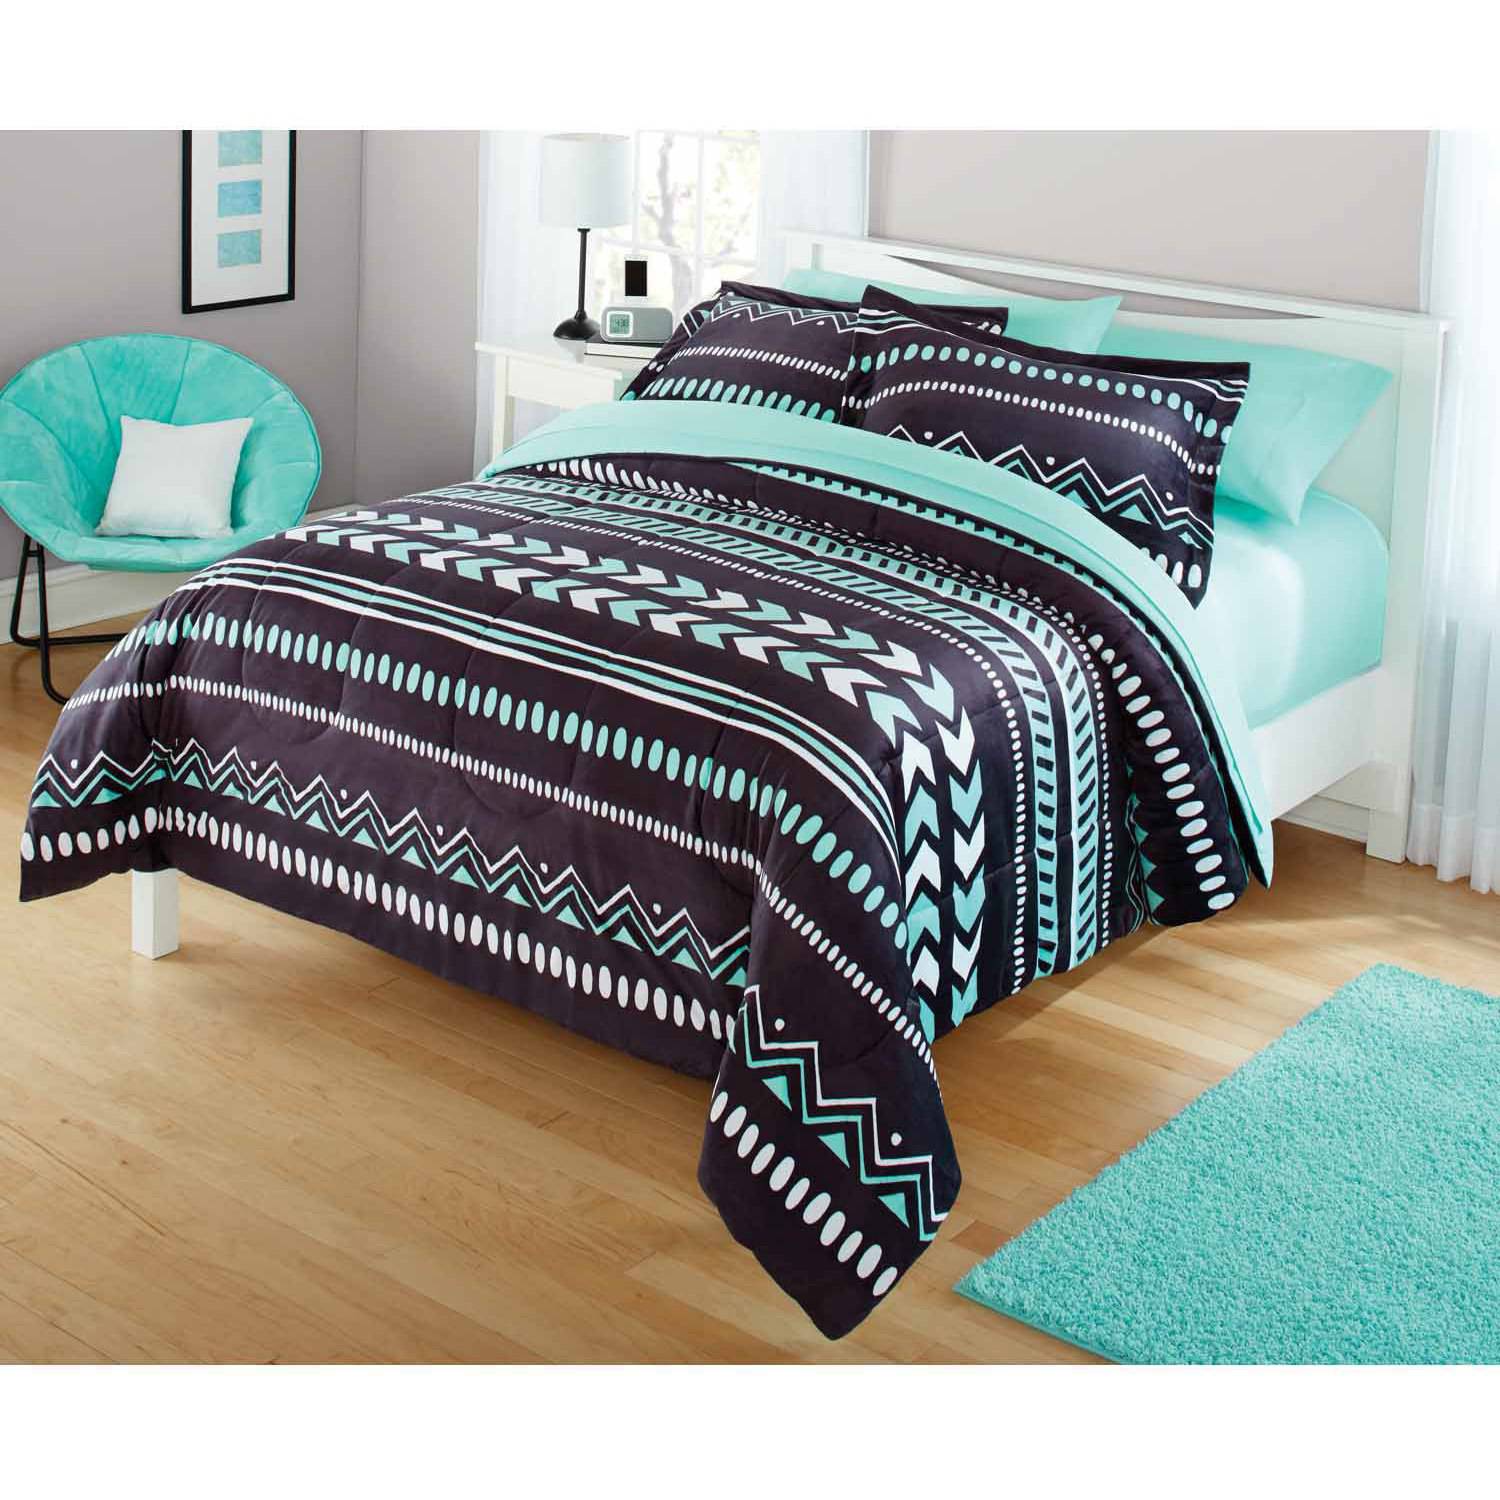 Your Zone Tribal Bedding Comforter Set, 1 Each - image 1 of 5